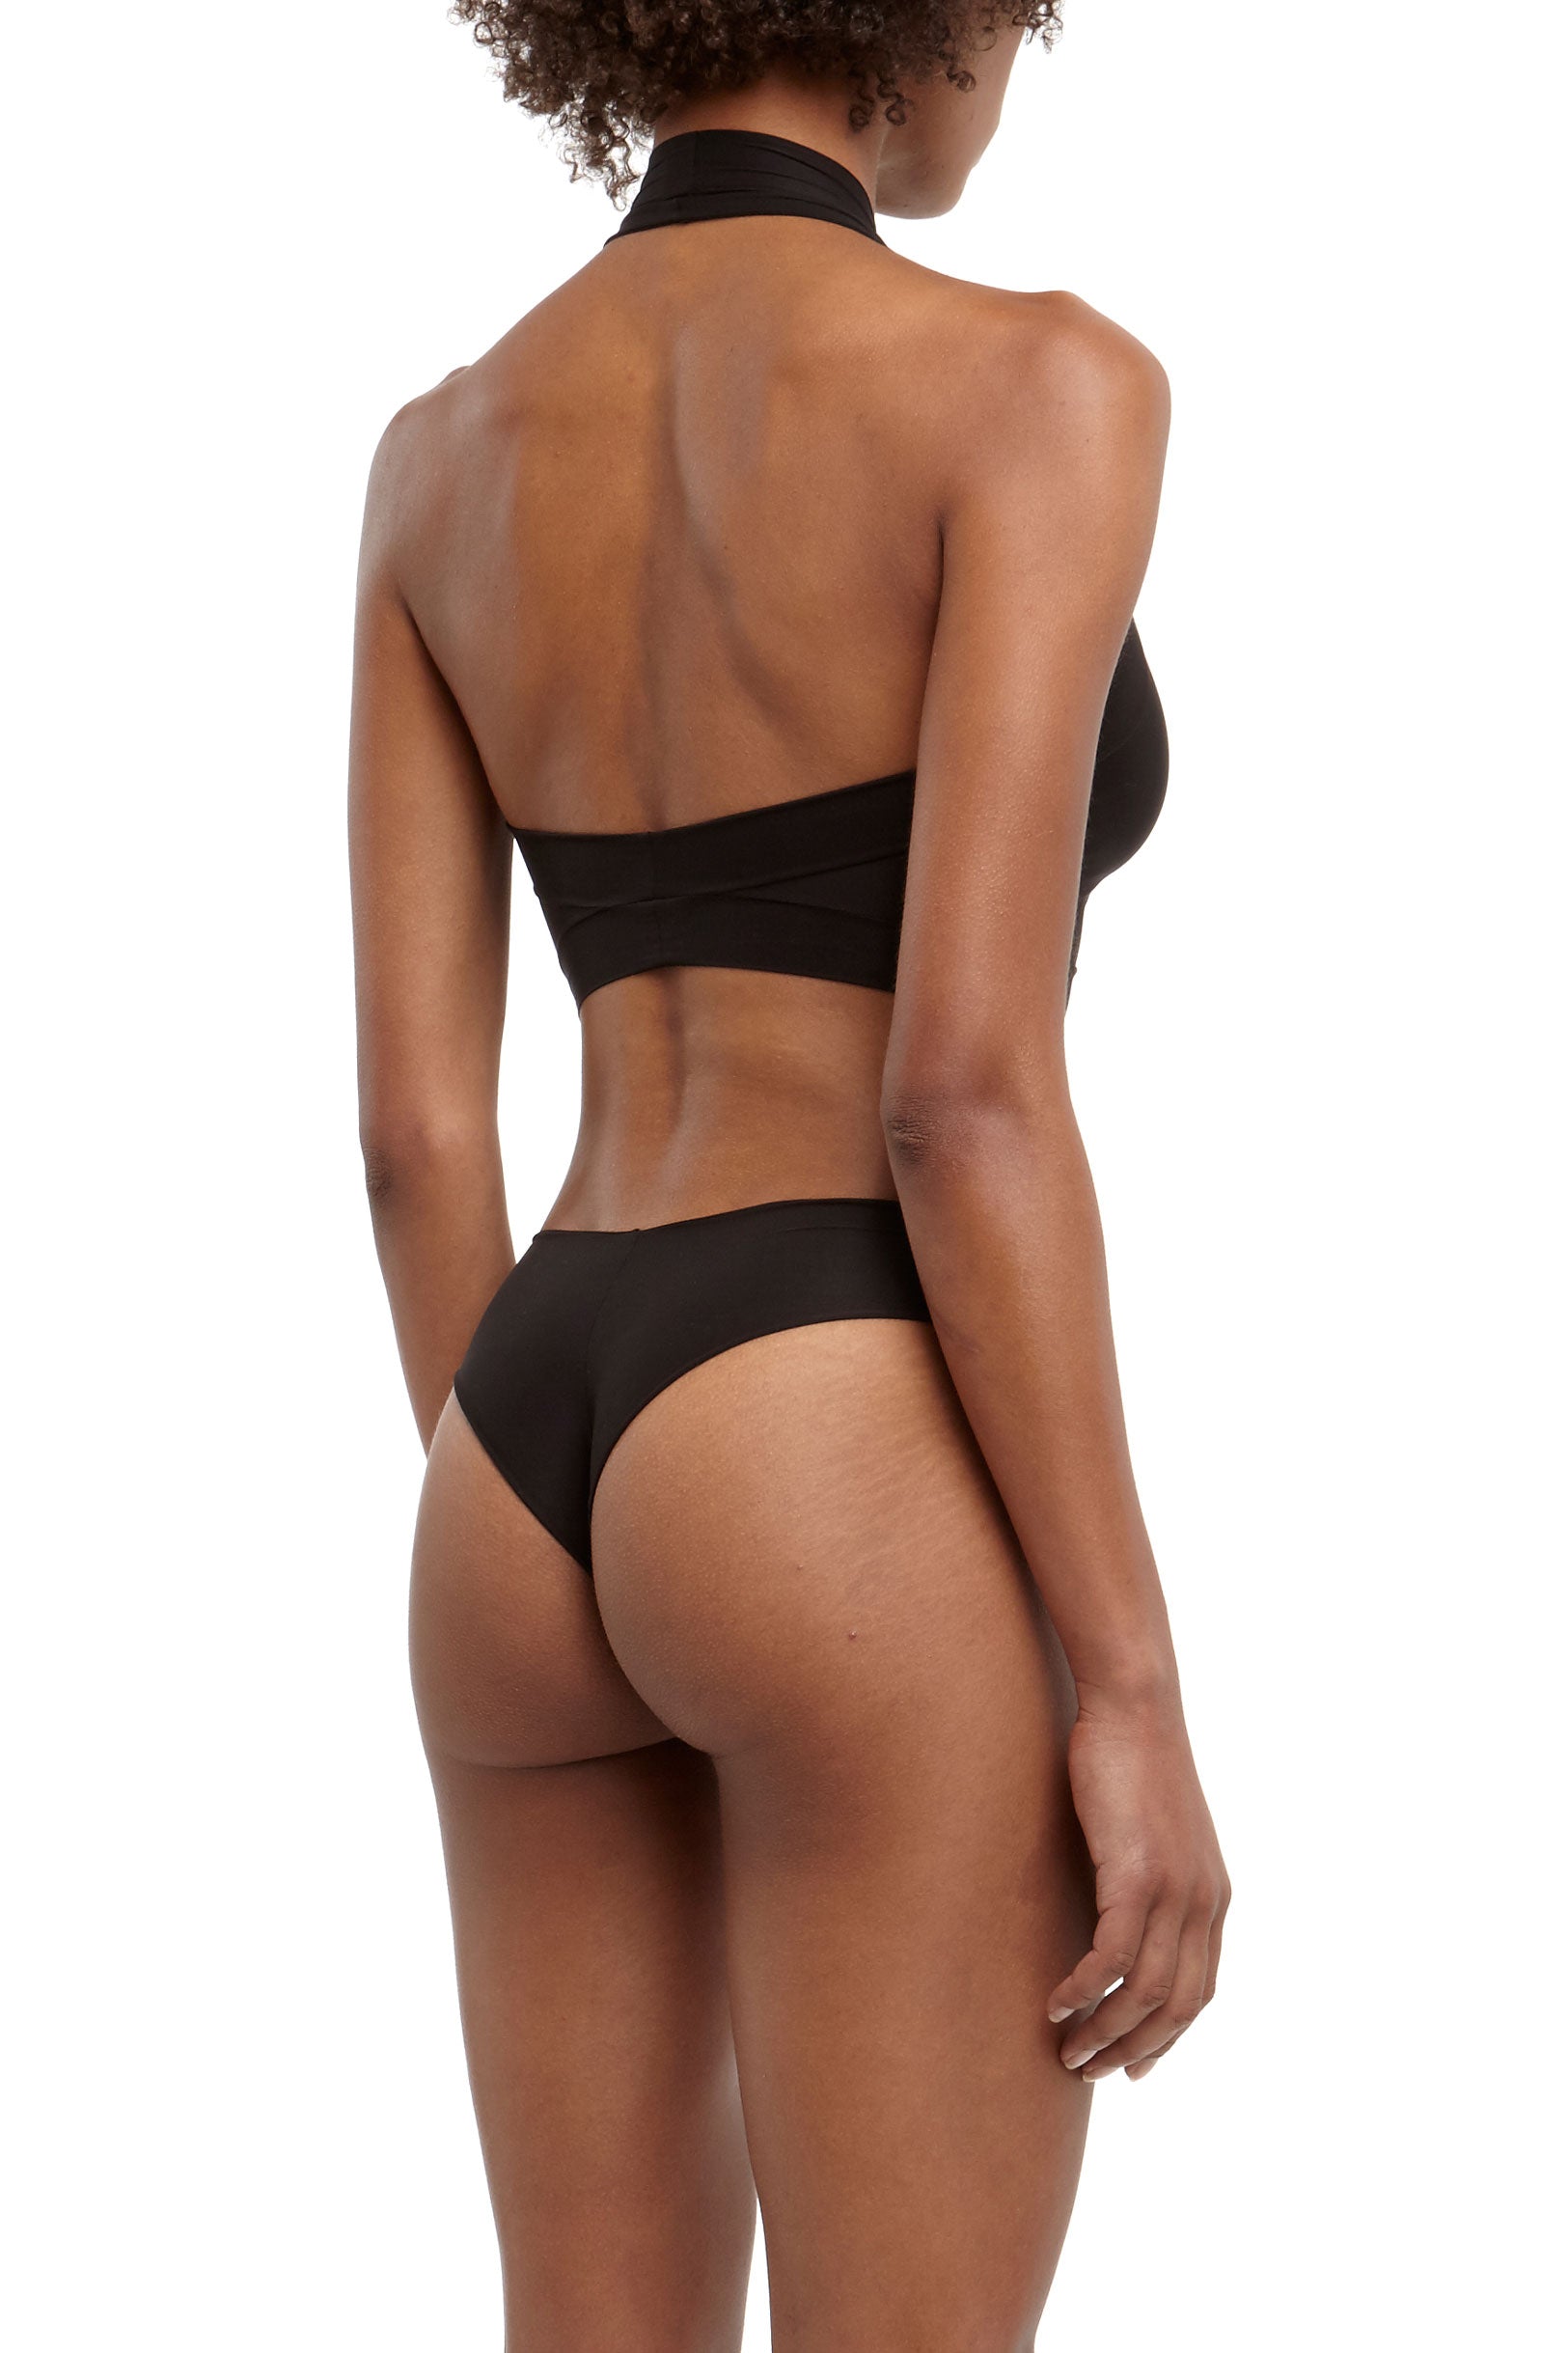 DSTM Brazilian thong and Axon halter top - side back